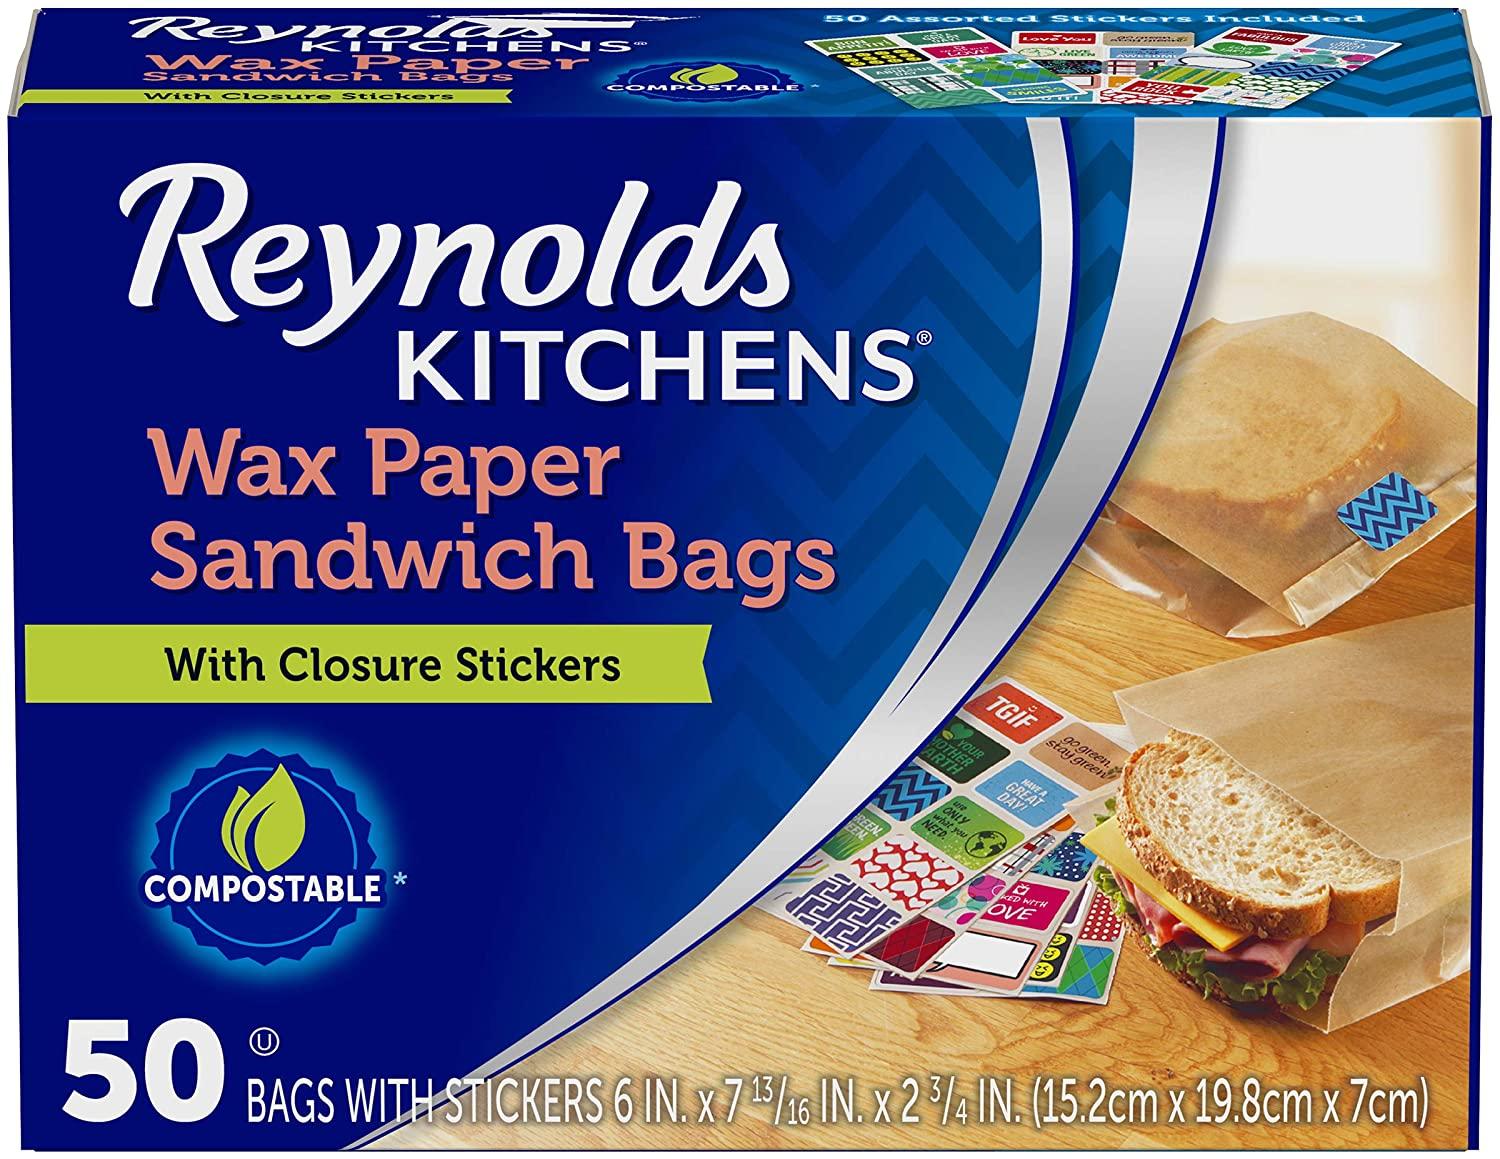 Reynolds Kitchen Wax Paper Sandwich and Snack Bags for $2.59 Shipped